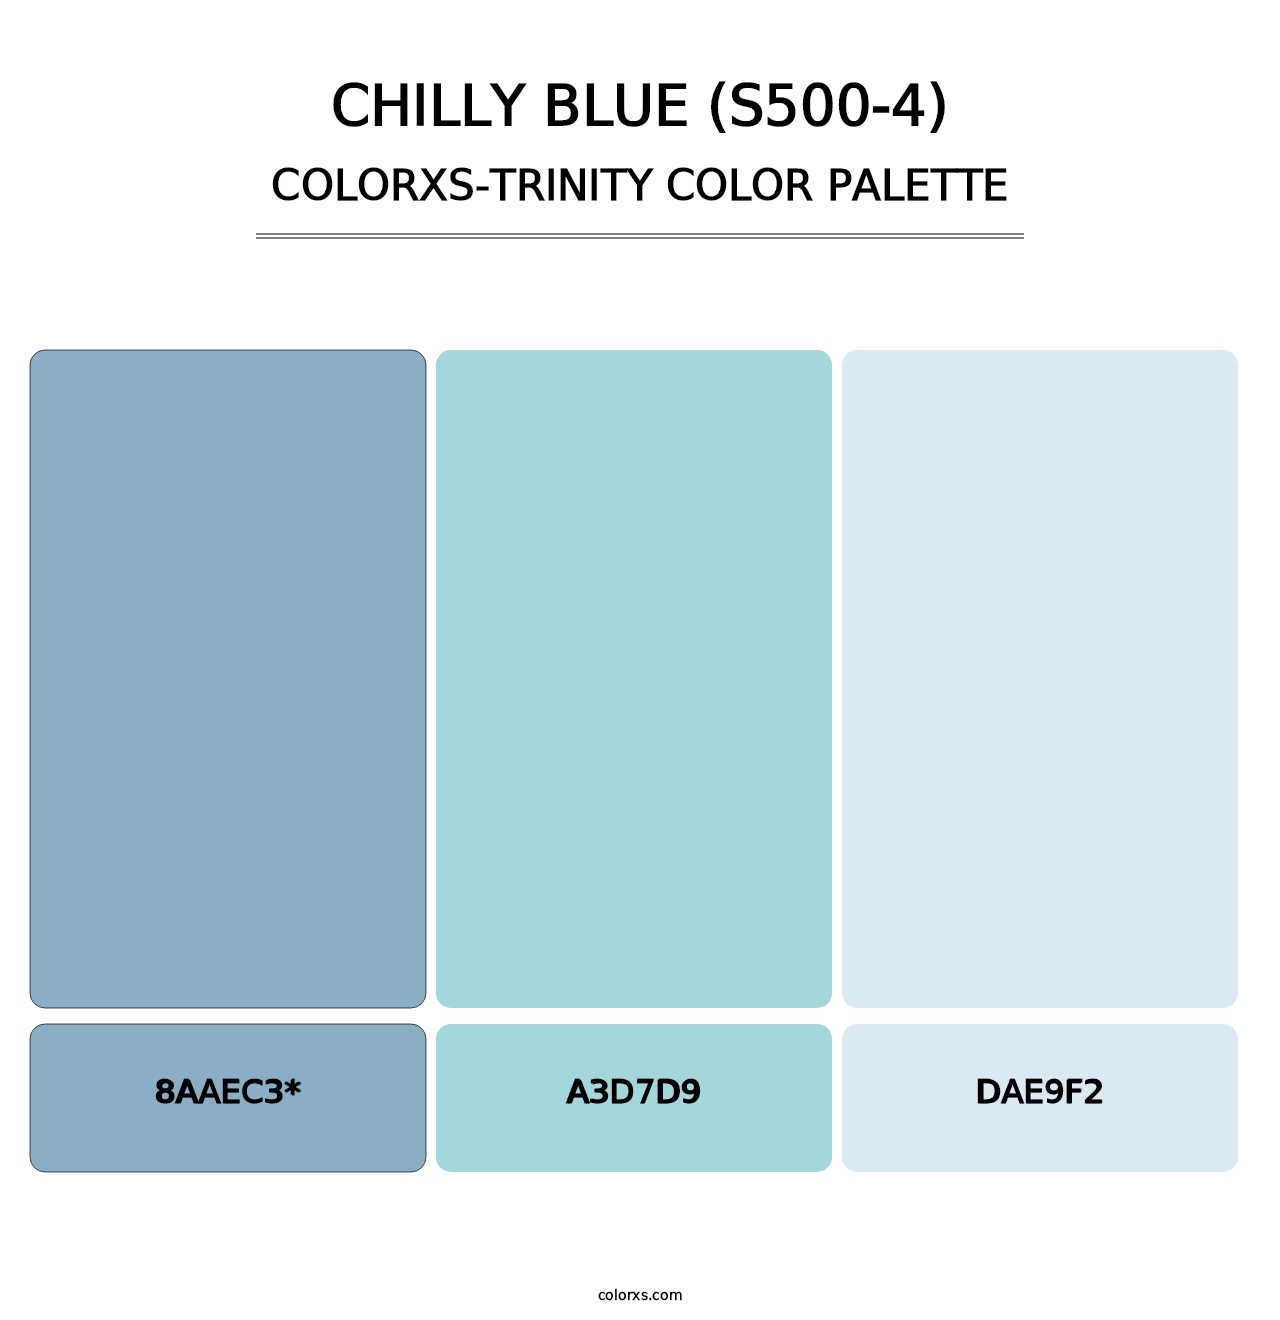 Chilly Blue (S500-4) - Colorxs Trinity Palette